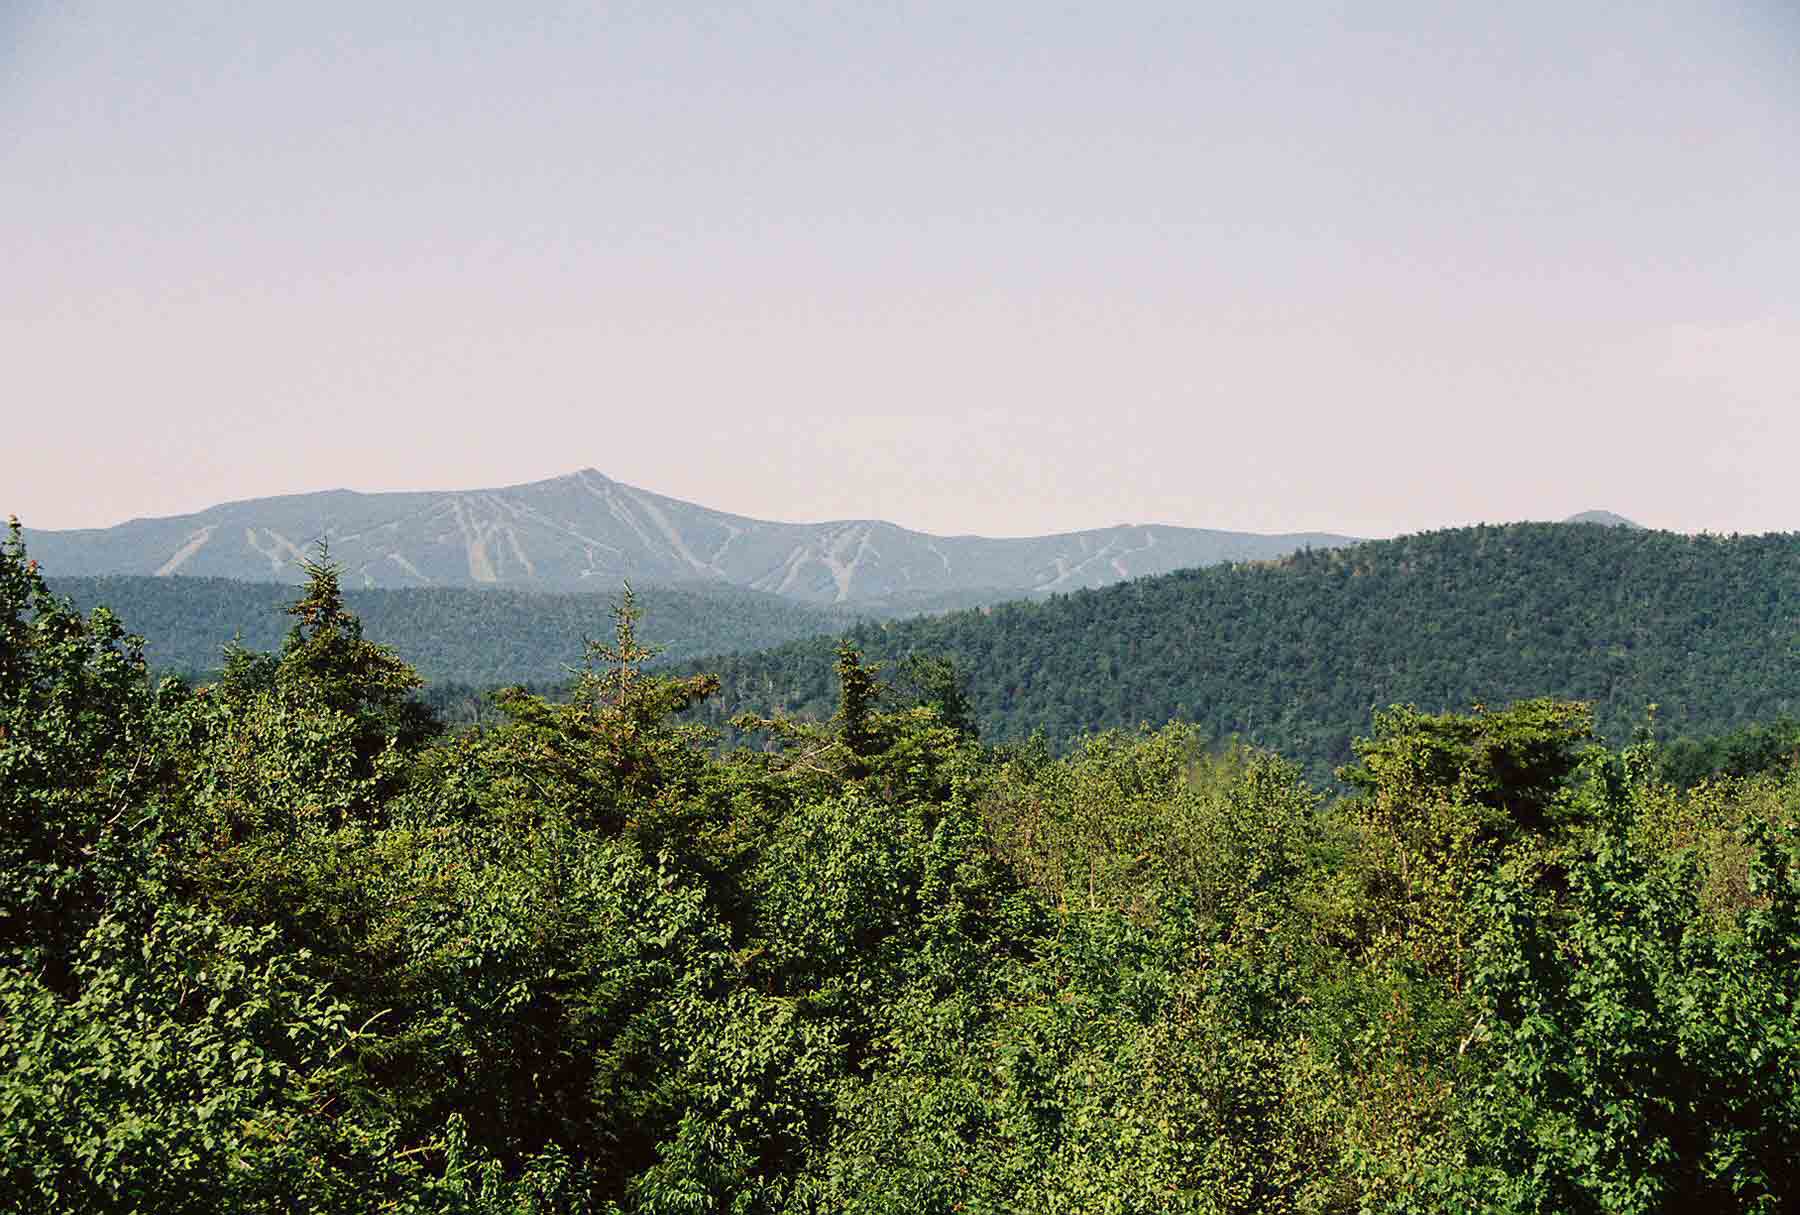 mm 6.2 - A side trail leads from the AT to the Lookout, a cabin which can be used by thru-hikers. There is a ladder to a platform on the roof from which there are 360 degree views. This shot is to the west towards Killington peak.  Courtesy dlcul@conncoll.edu